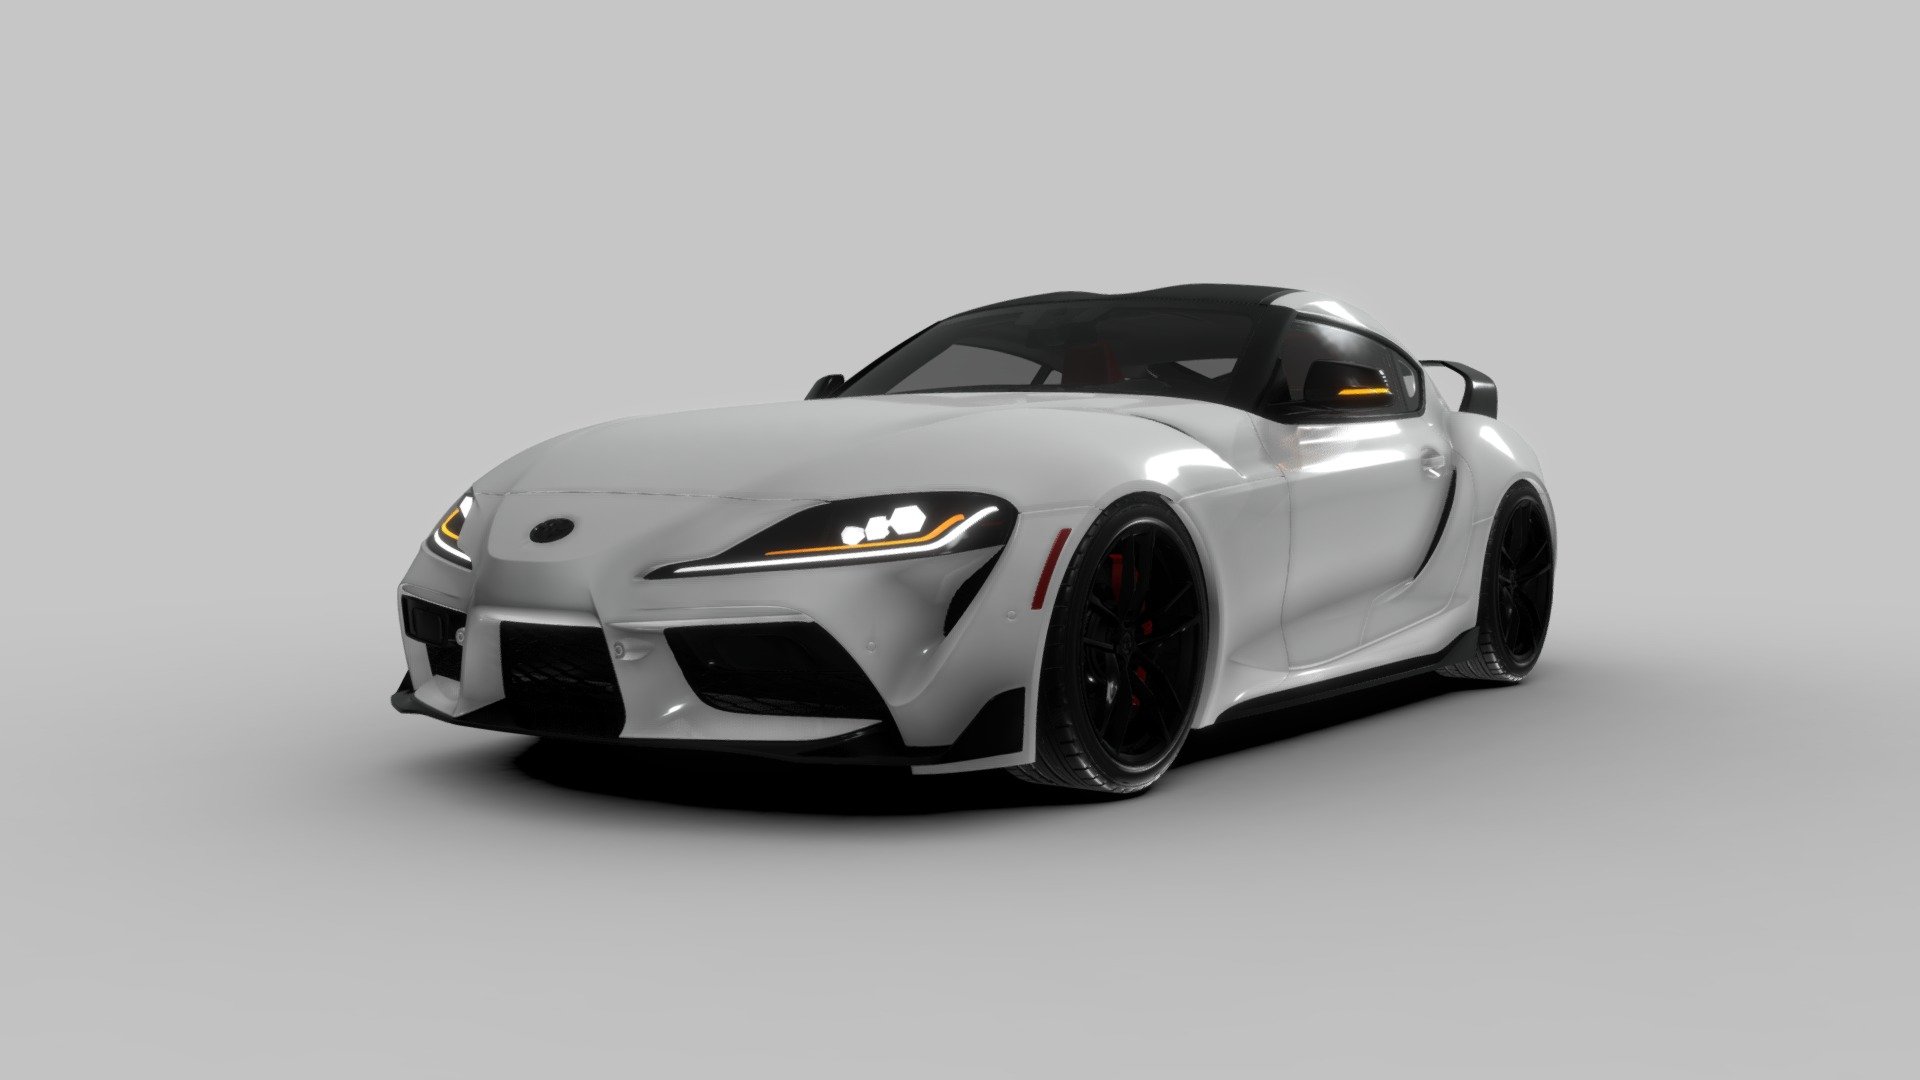 Modified Supra model from thelightning. Fixed bugs, changed textures, remodeled some parts.

A quick render:


Follow my profile:
https://www.artstation.com/jiaxingyang

Please click the LIKE button if you enjoy this model.
Check my model page for more info! - Toyota Supra - Download Free 3D model by Jiaxing (@saitoyang) 3d model